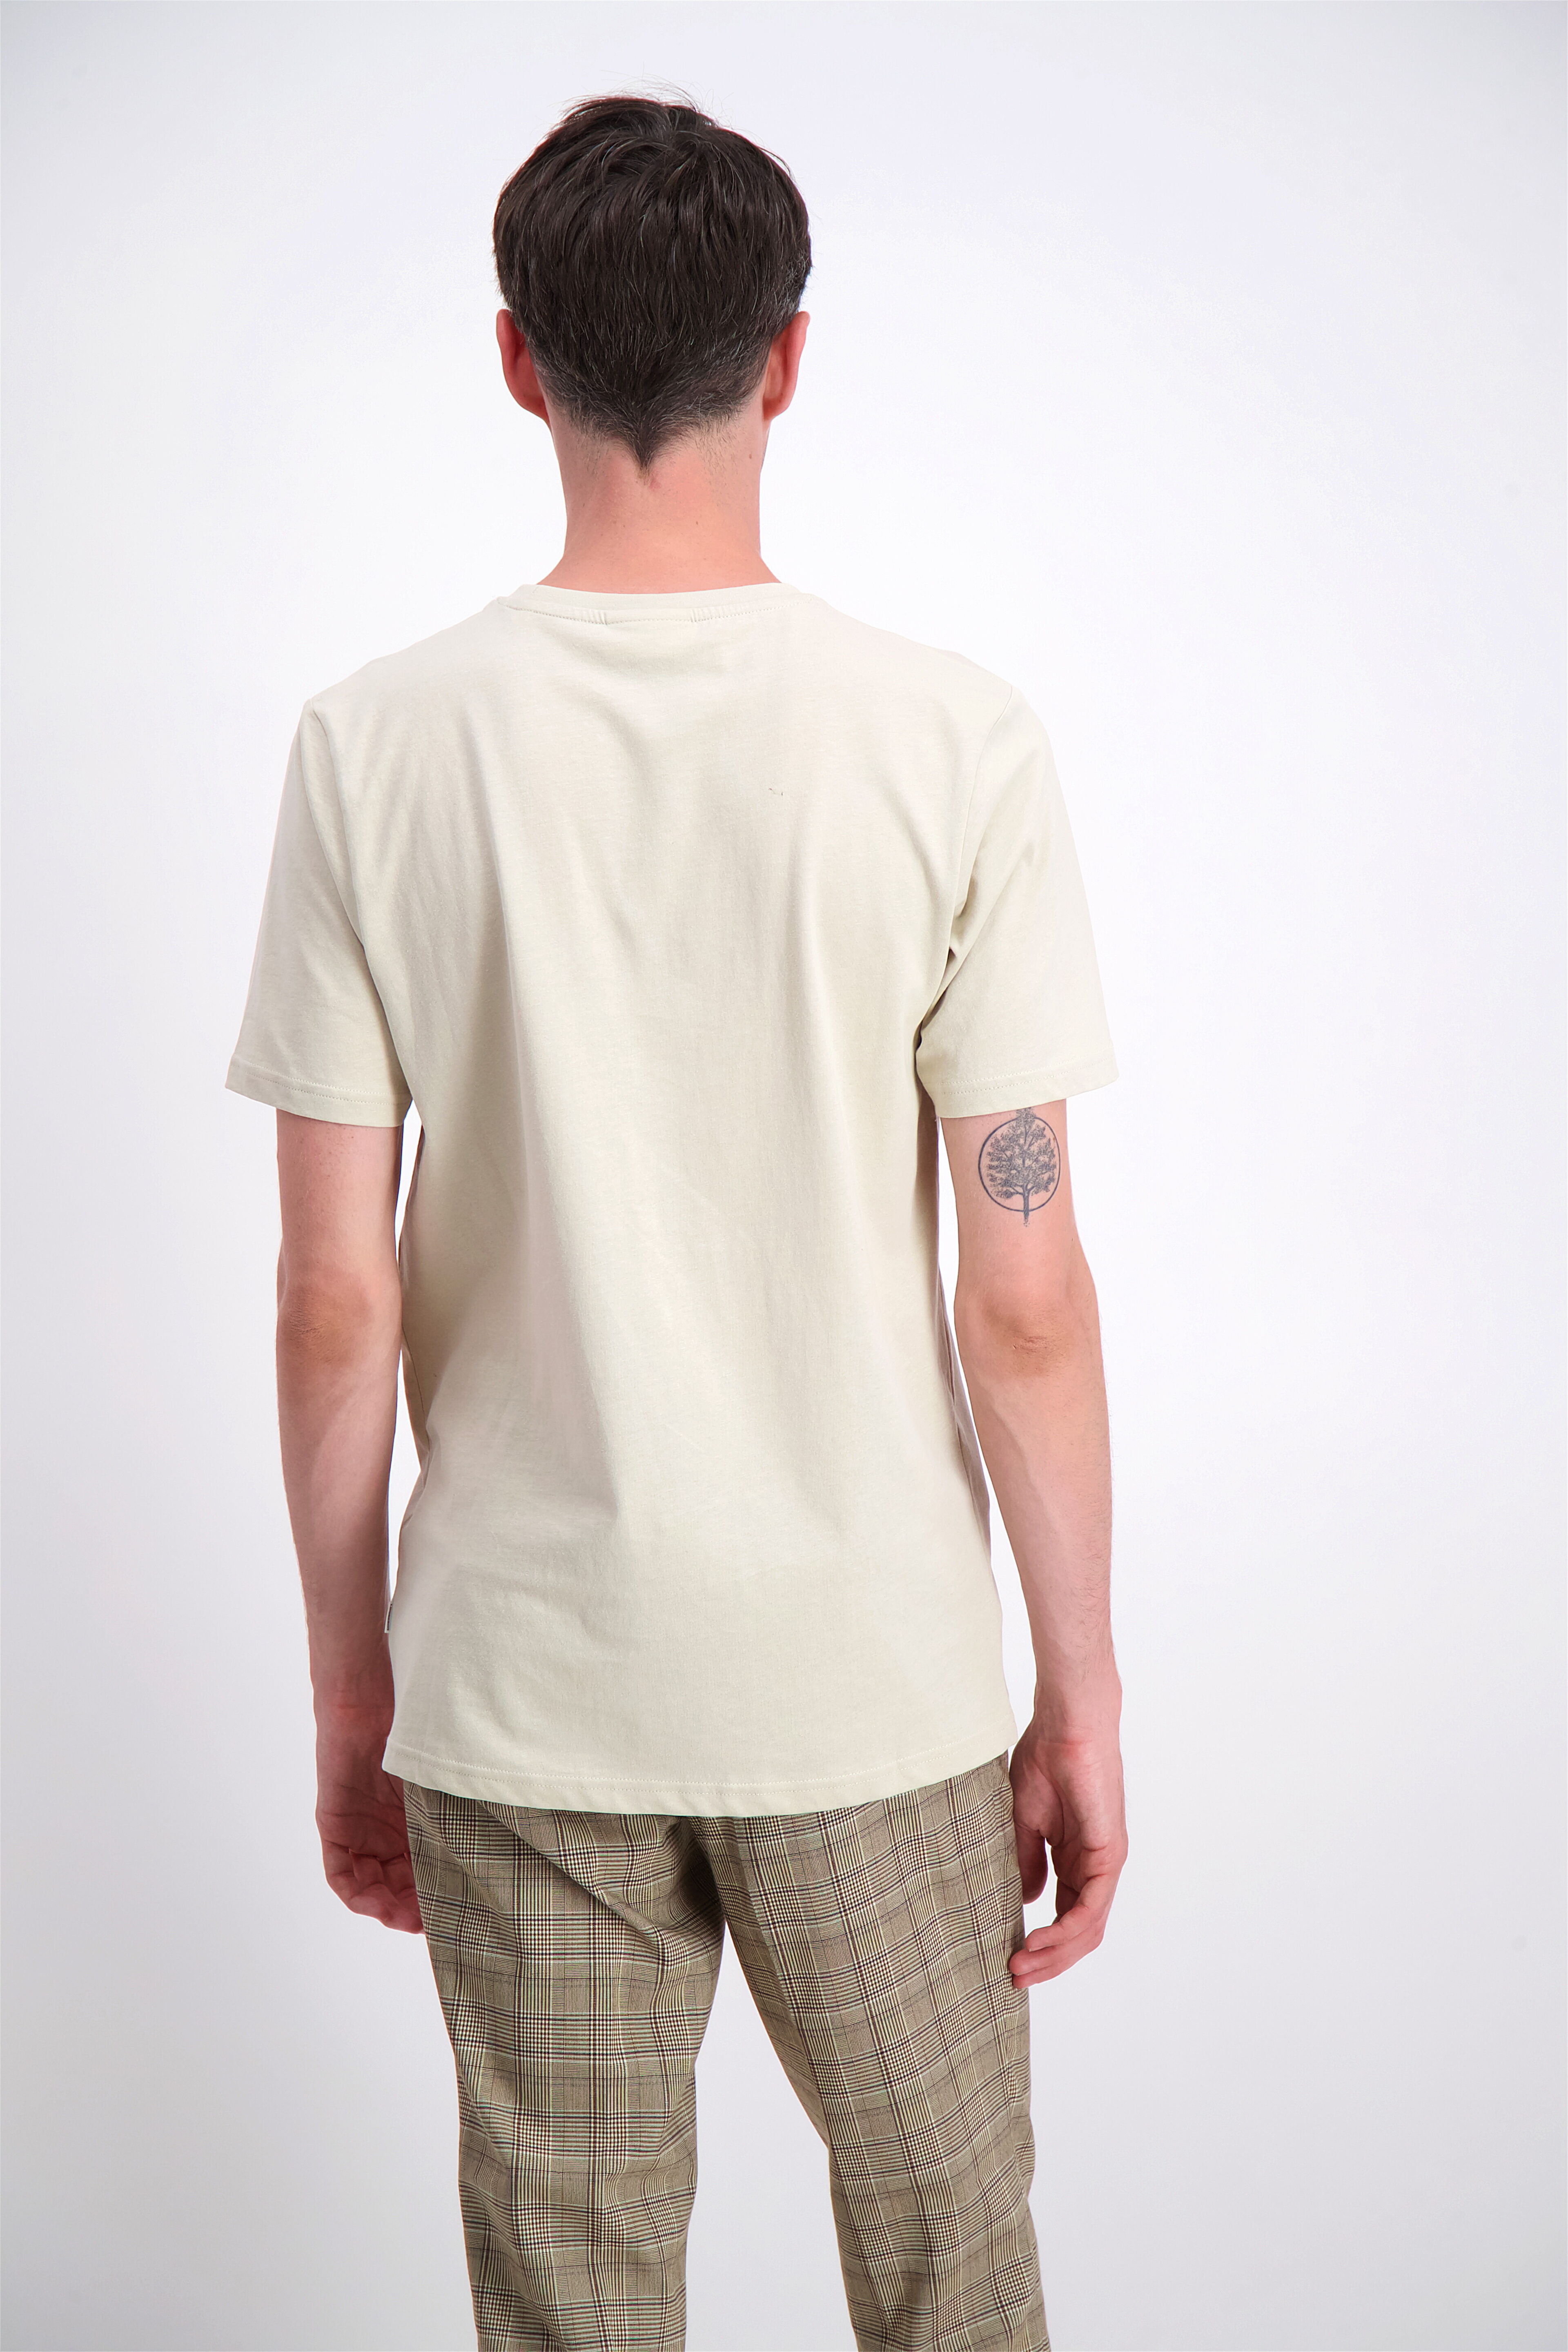 Tee | Relaxed fit 30-400180